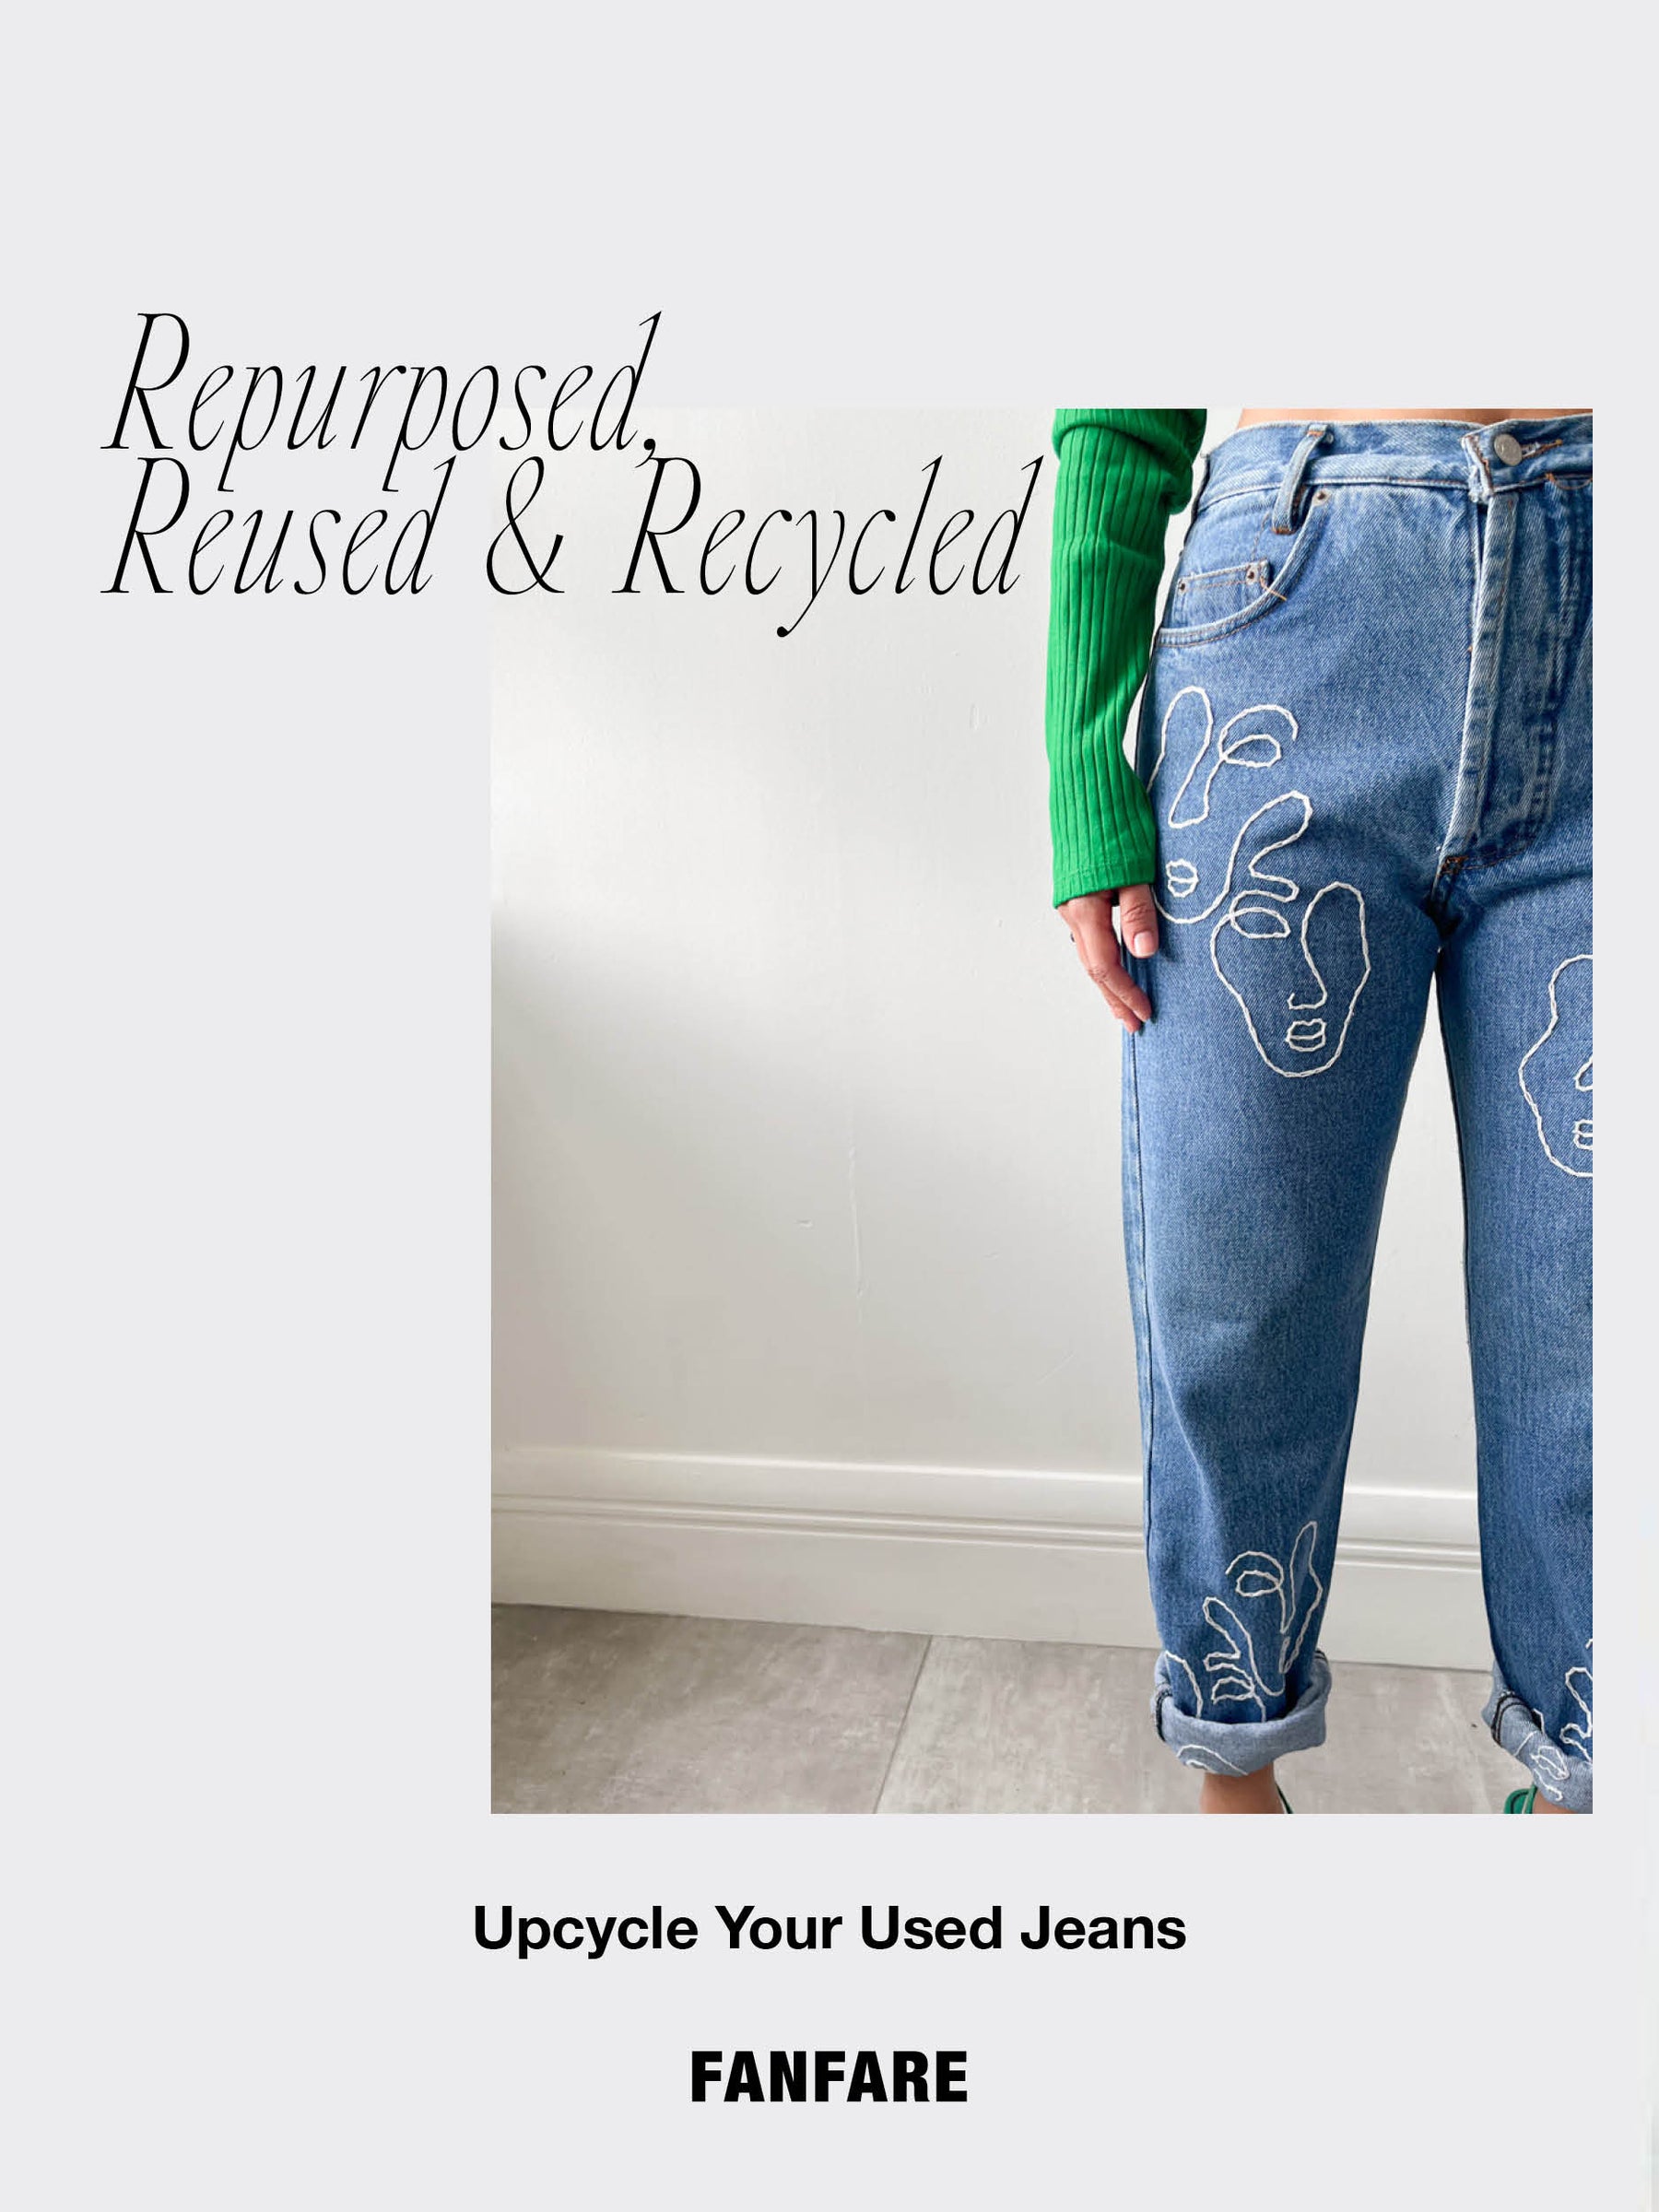 Send us your worn-out jeans and we’ll repair and upcycled them to give them a second chance in your wardrobe. We can embroider any pattern, any writing, or even paint artwork directly onto the jeans to create a style that is completely unique to you. Produced by Fanfare Label, a contemporary sustainable womenswear brand.